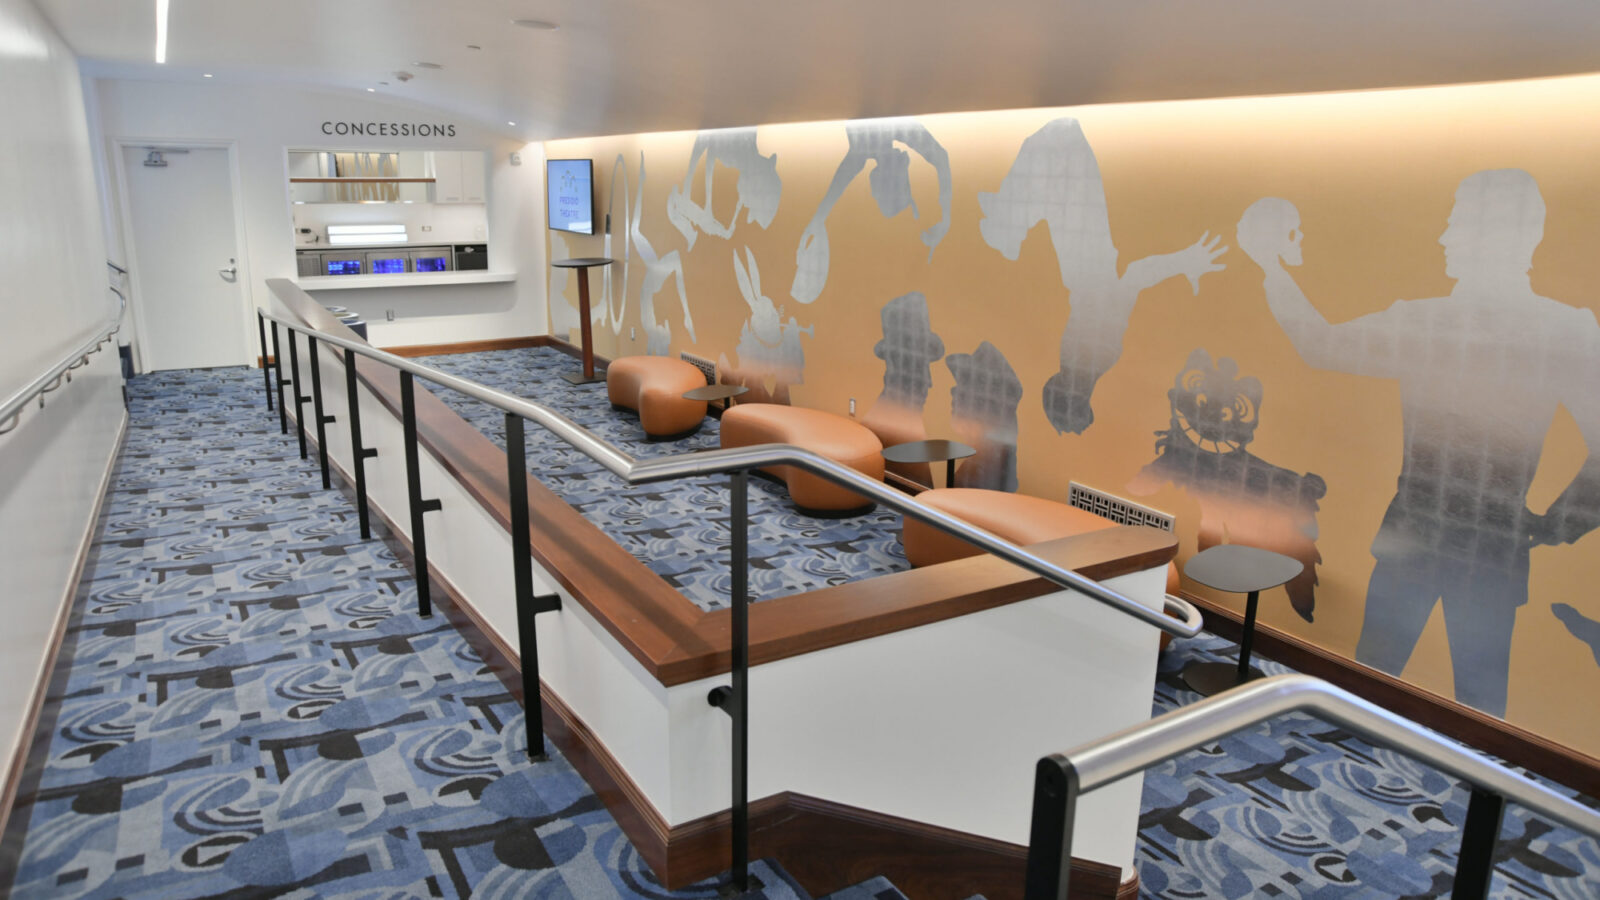 Upper Lounge and Concessions